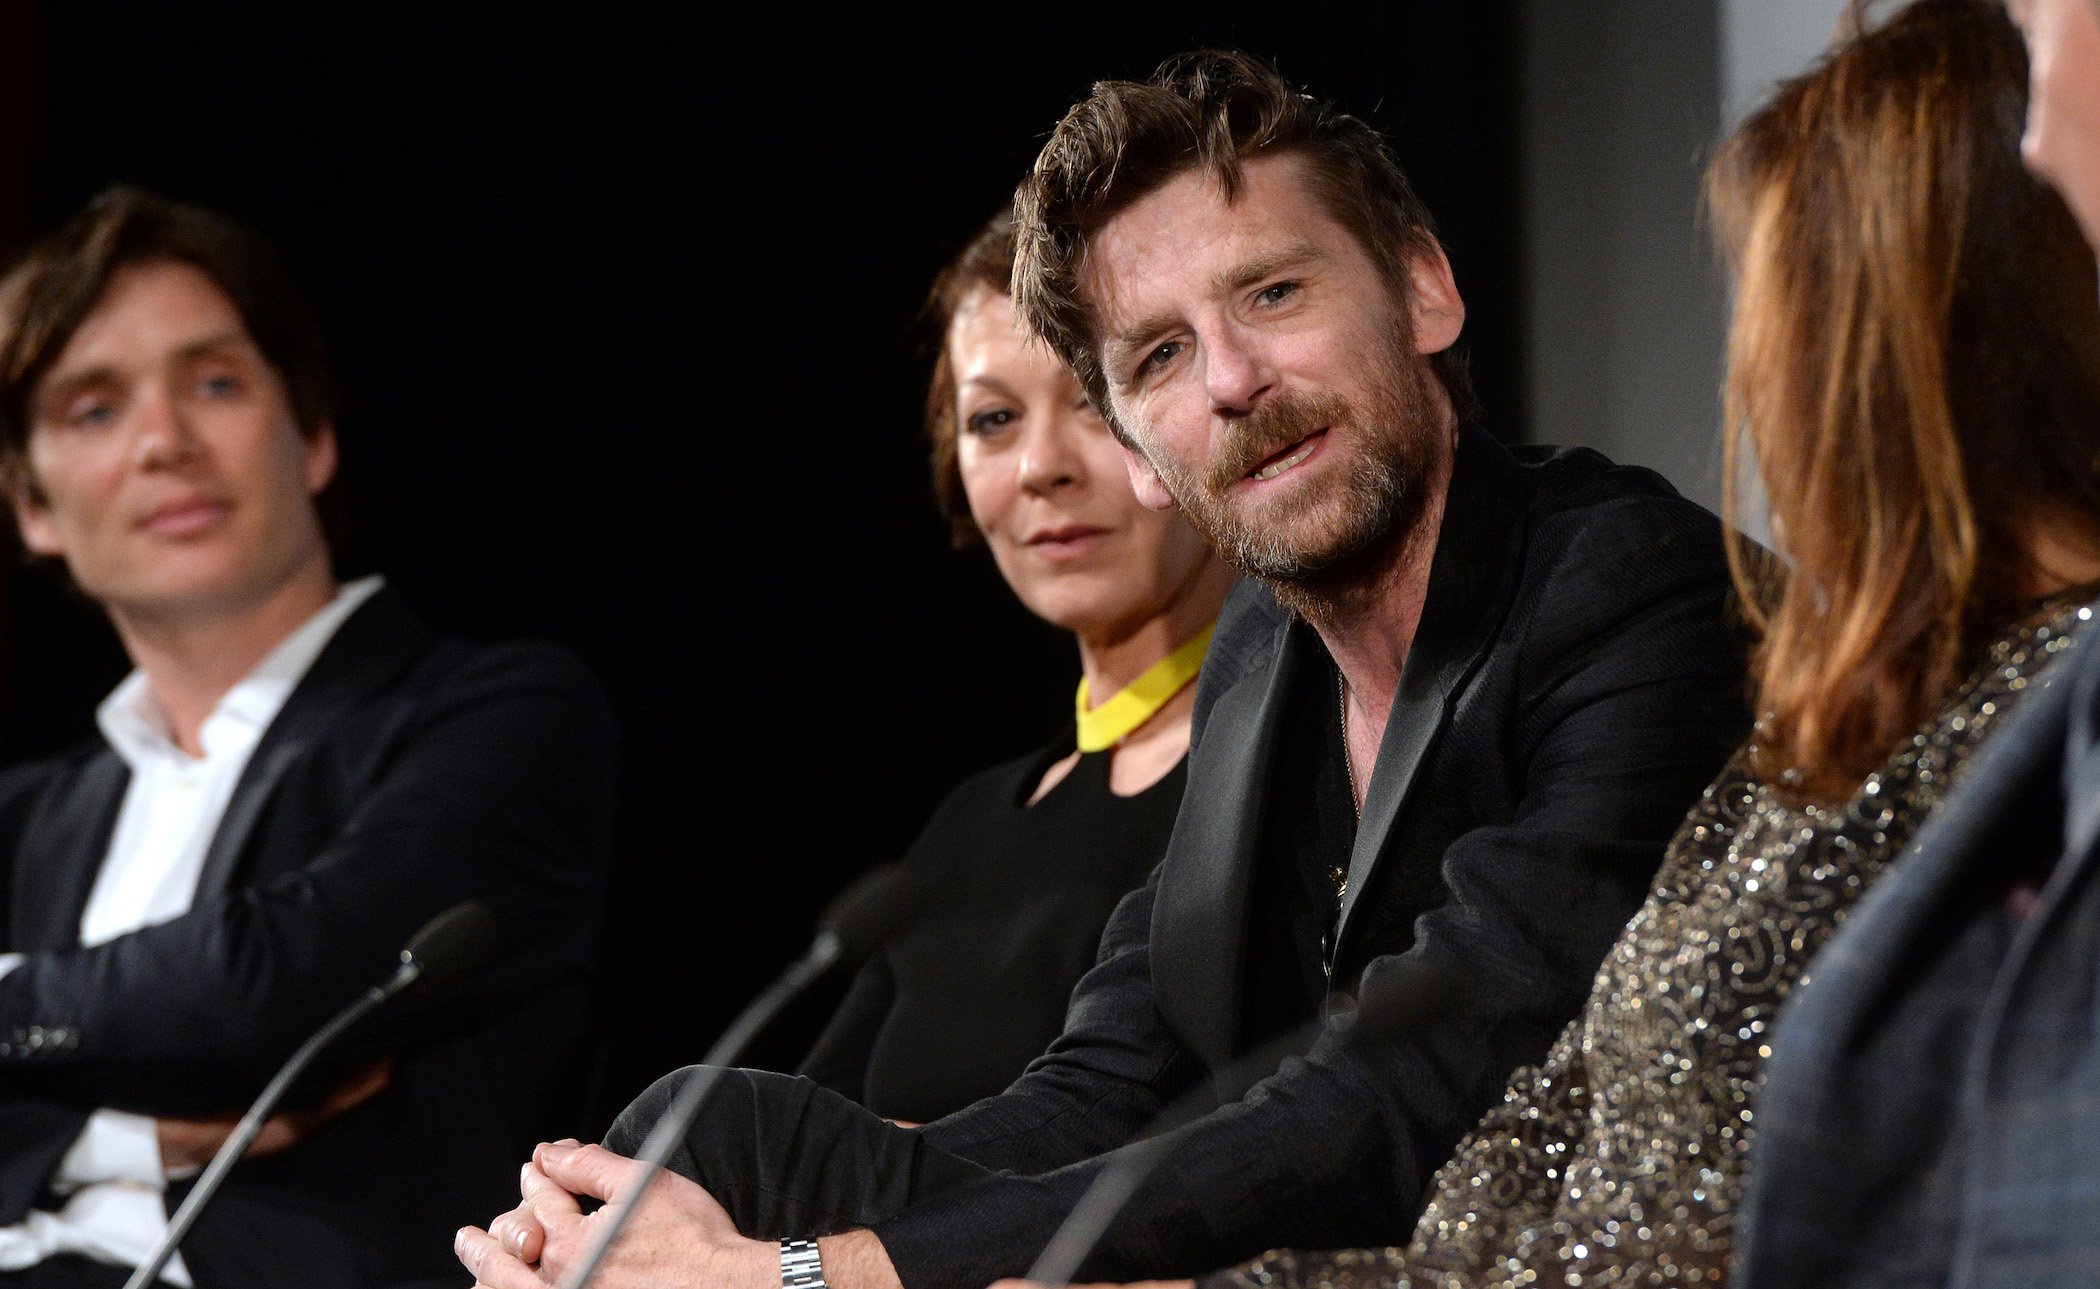 'Peaky Blinders' Season 6 star Paul Anderson in focus with Cillian Murphy and Helen McCrory next to him at a Q&A